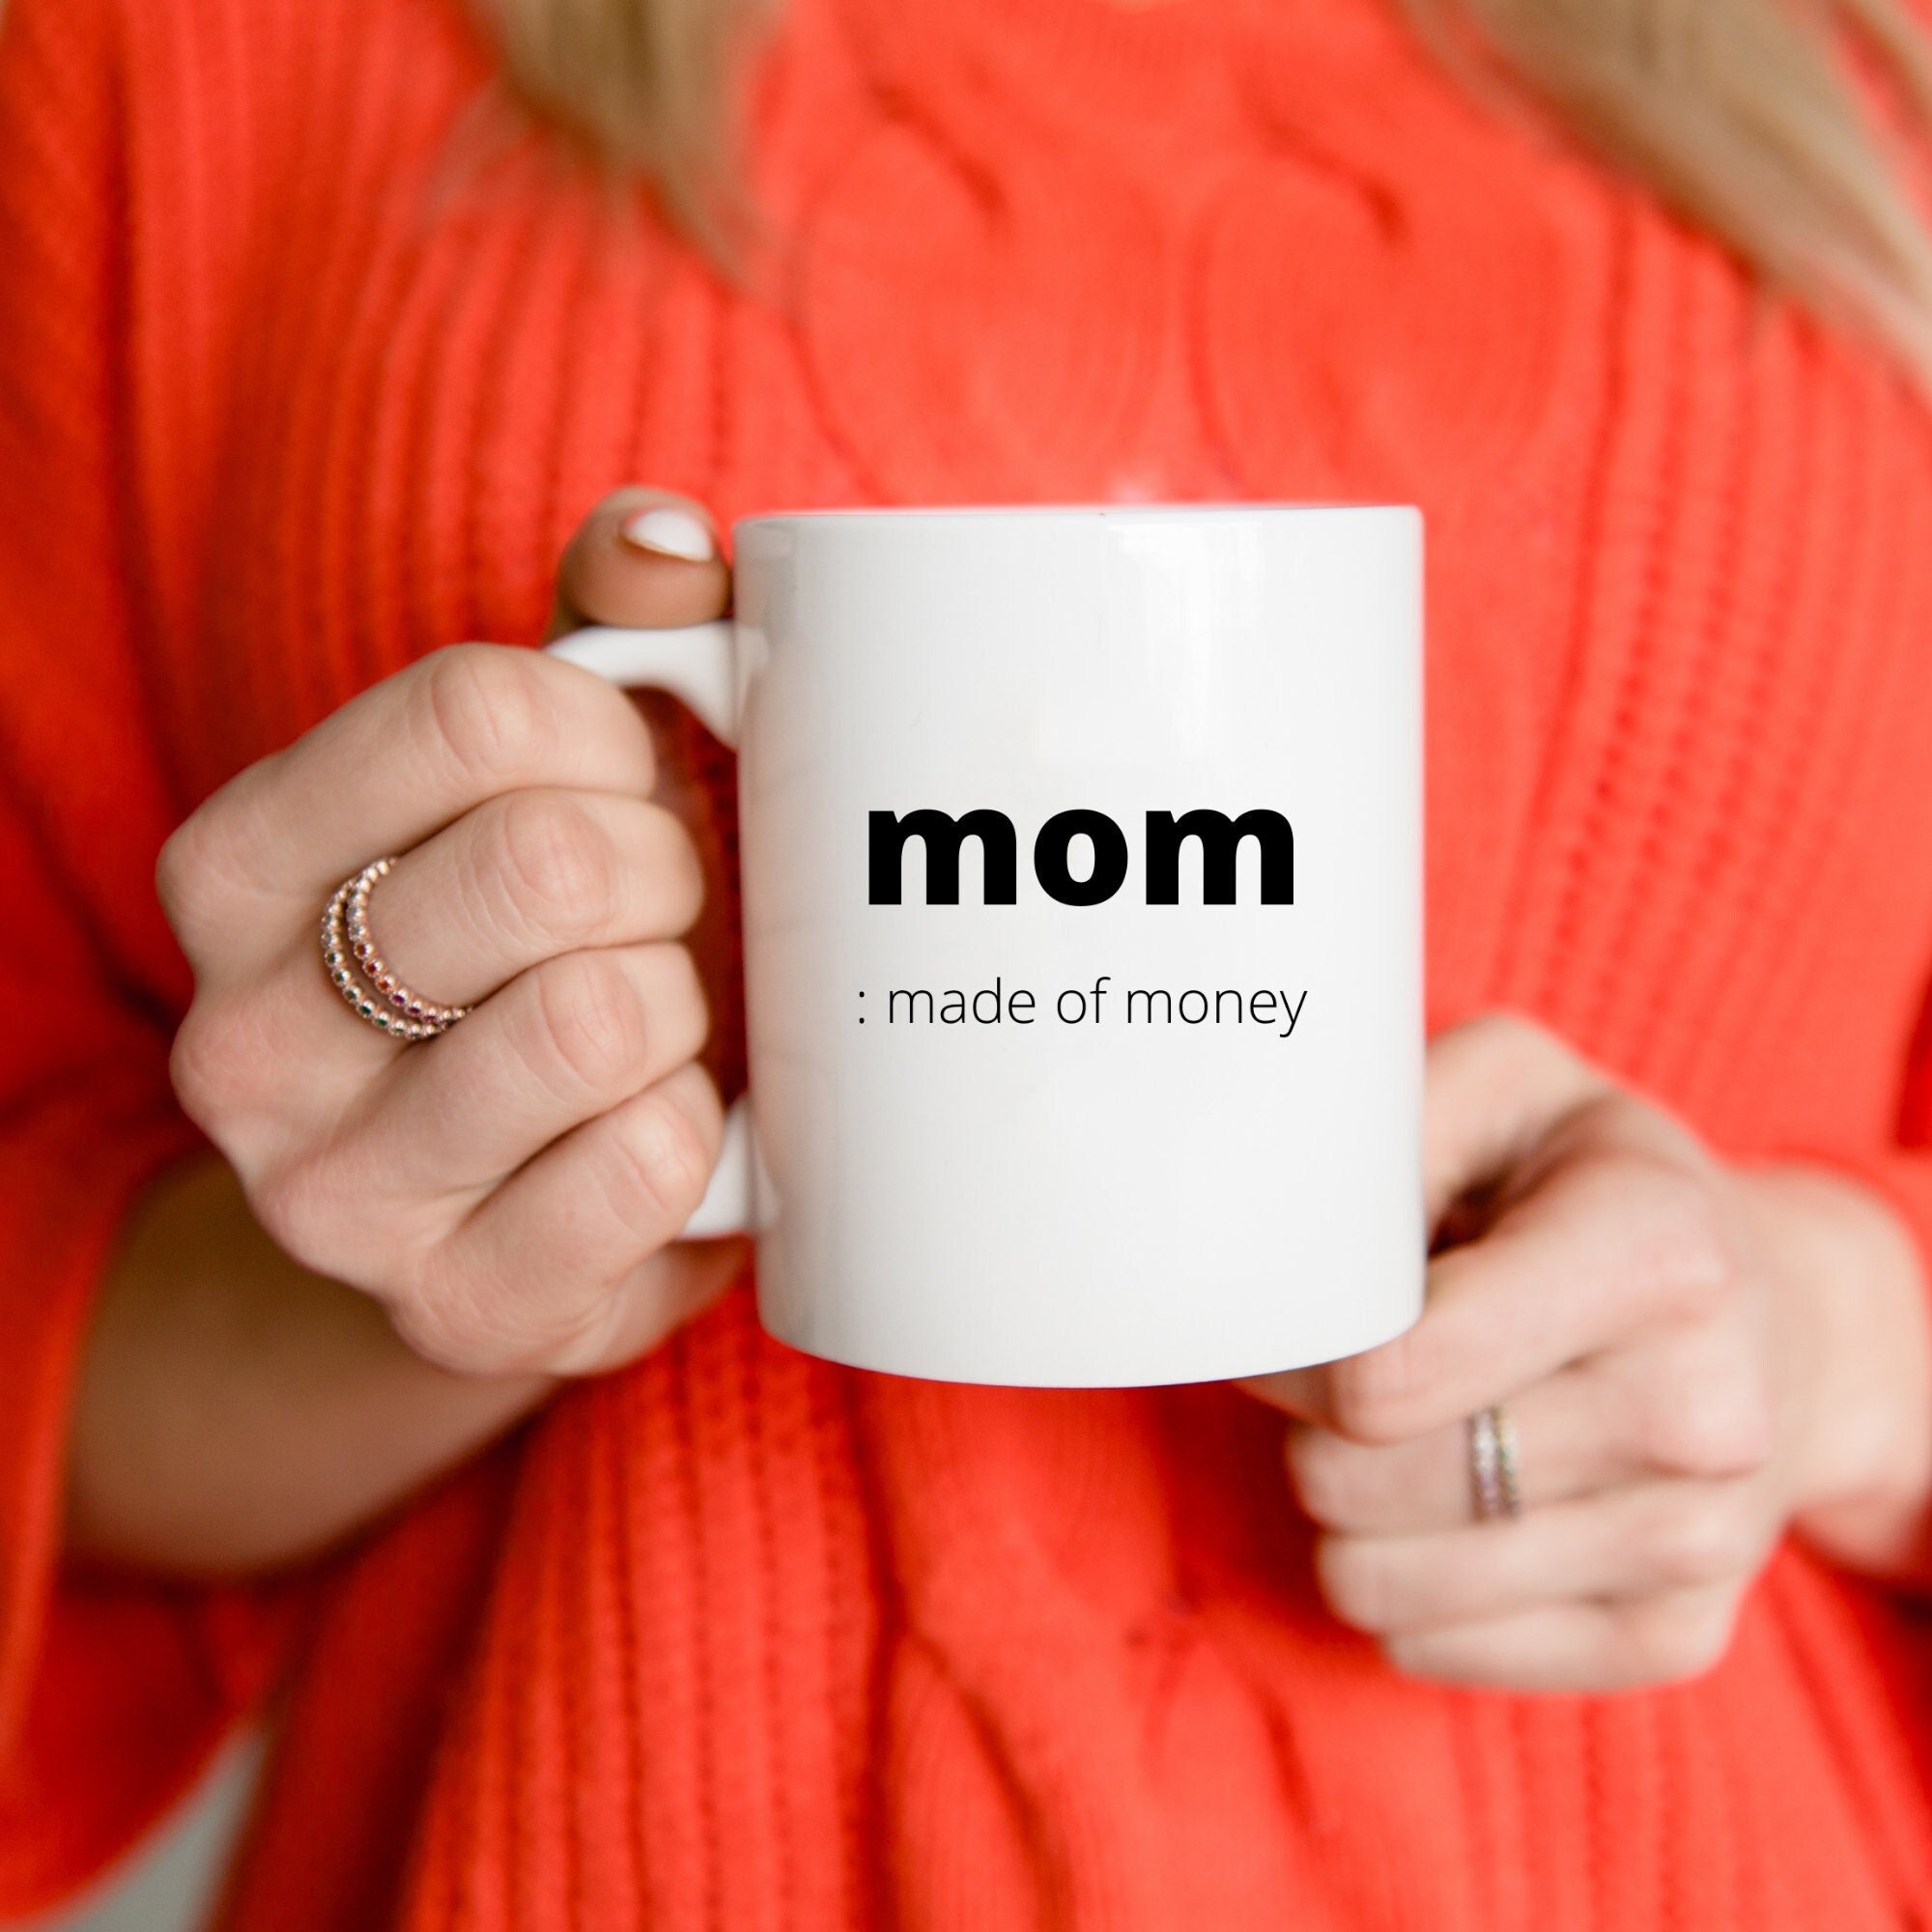 MAUAG Funny Mothers Day for Mom Coffee Mug, Dear Mom, Thanks for Being  Love, Your Favorite Best G…See more MAUAG Funny Mothers Day for Mom Coffee